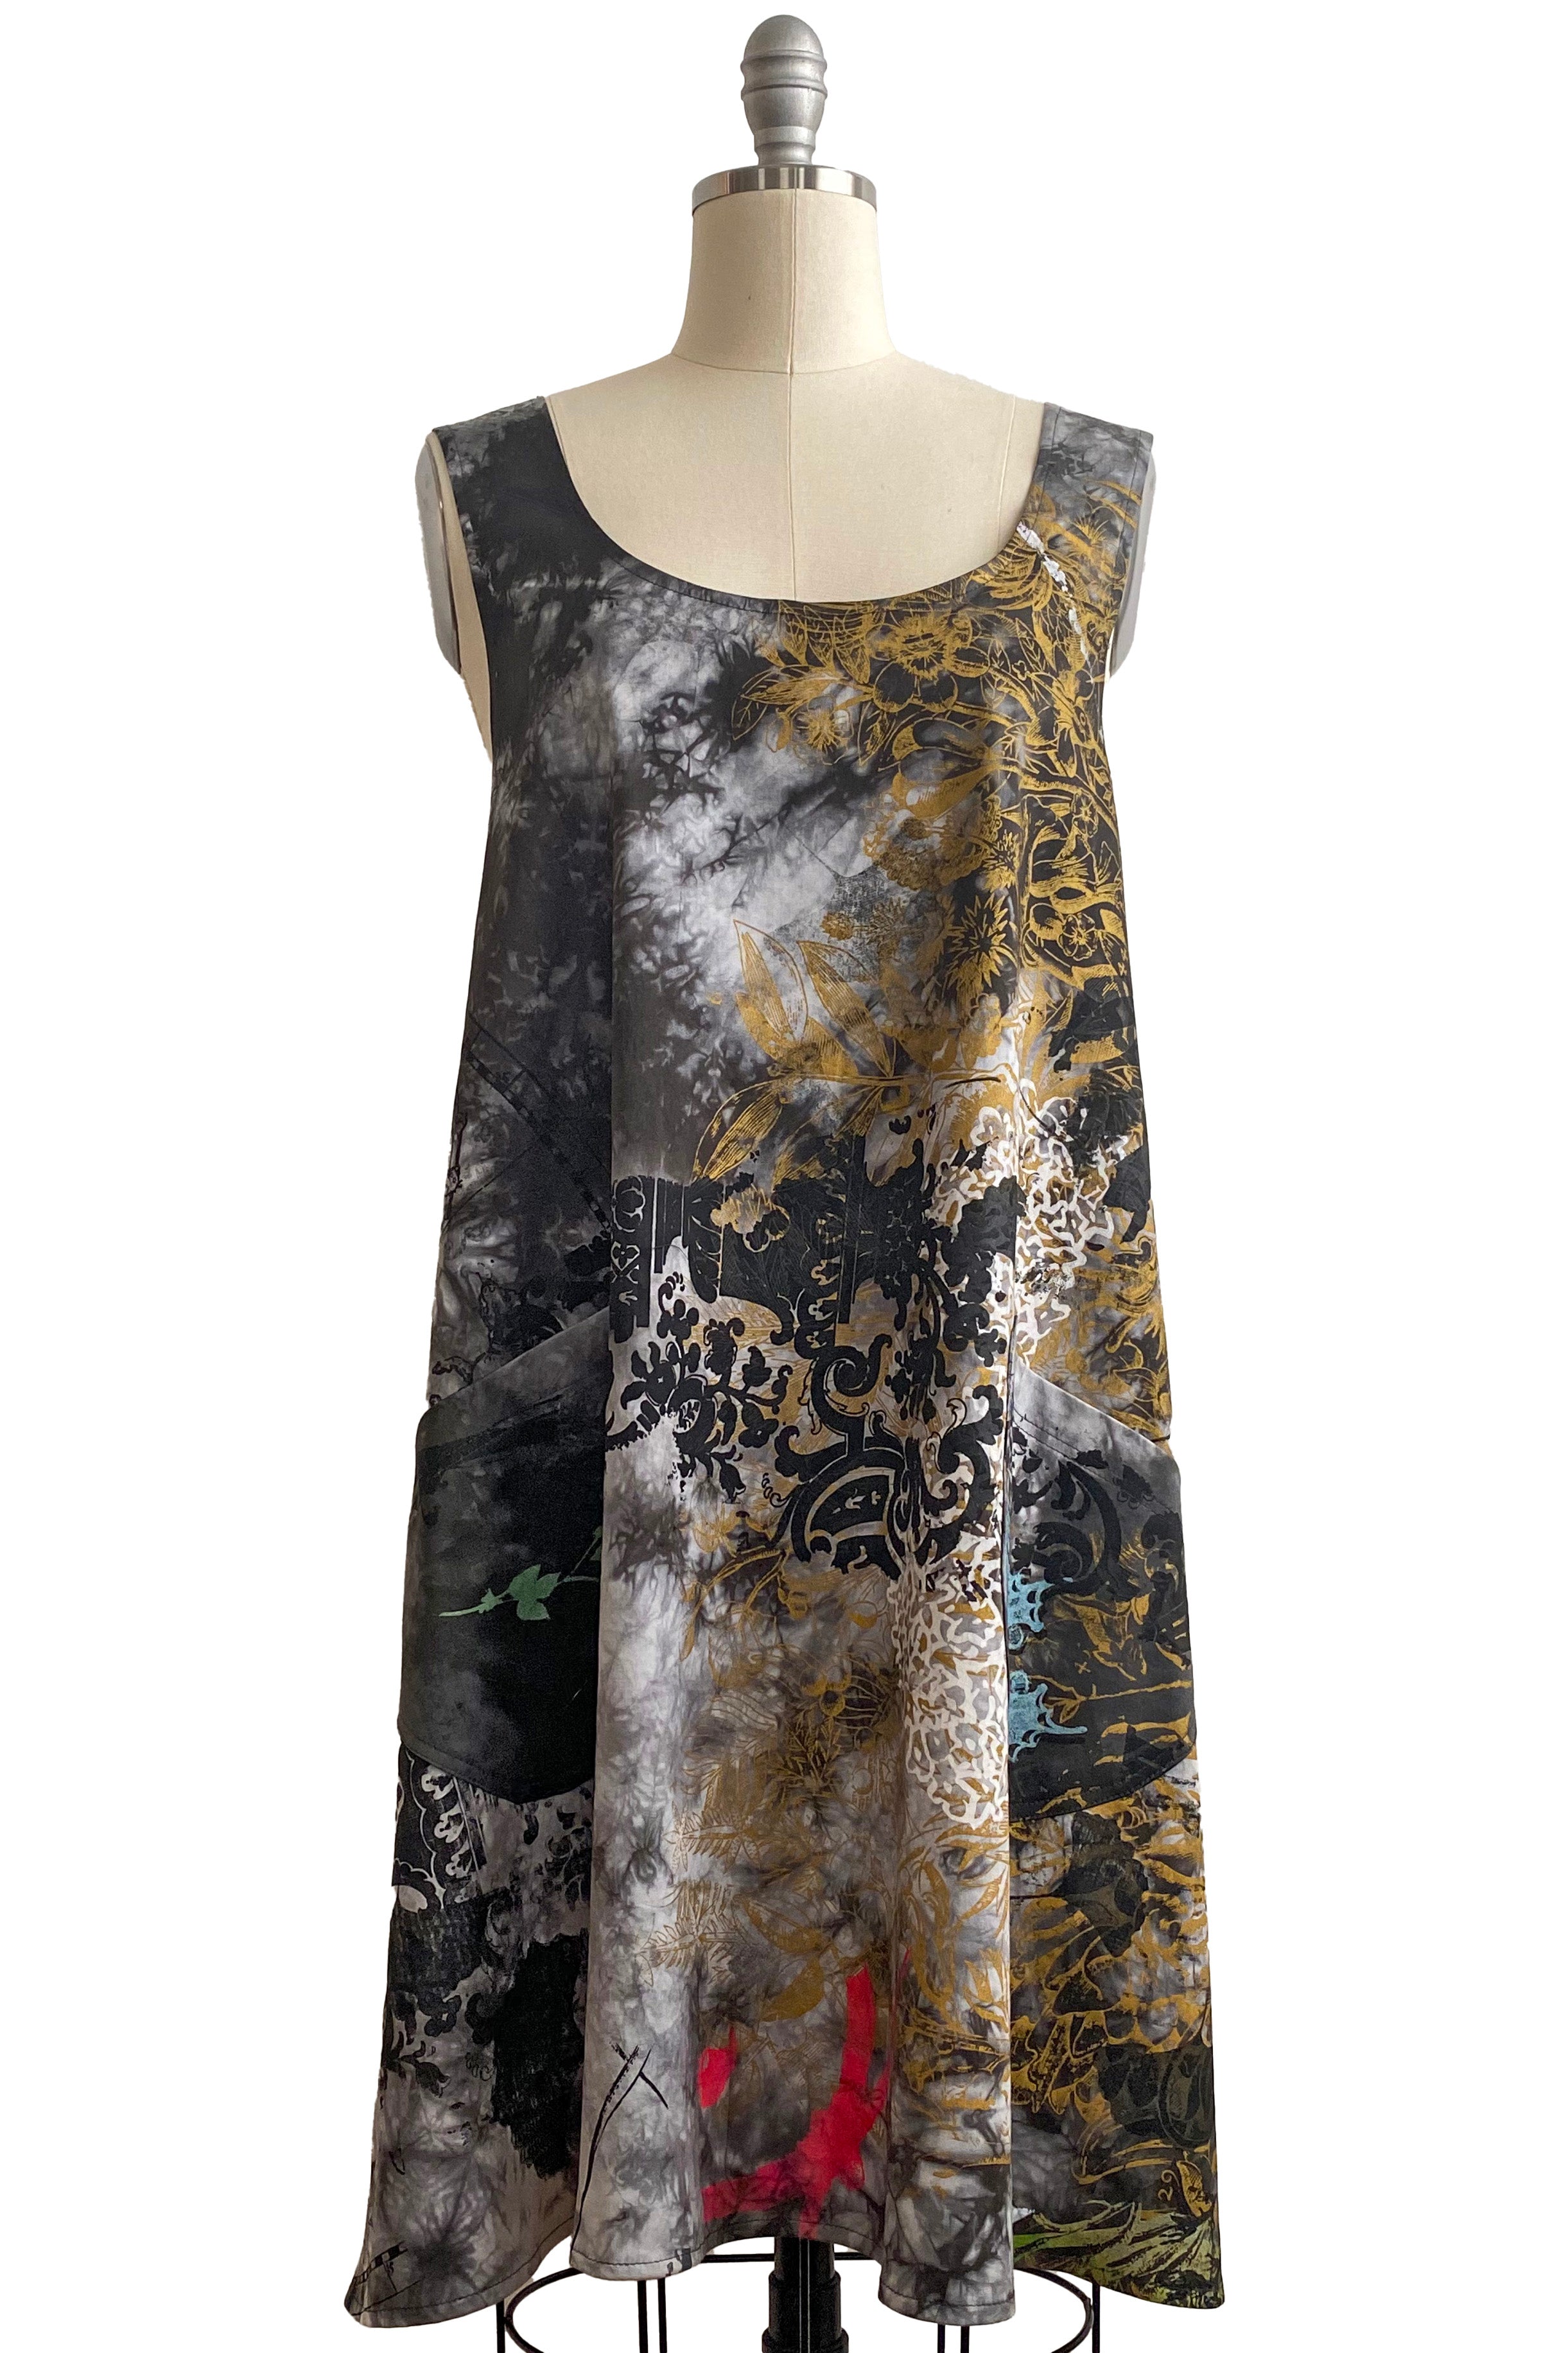 Apron Dress in Cotton w/ Chaos Print & Tie Dye - Storm, Gold, & Pink Accent